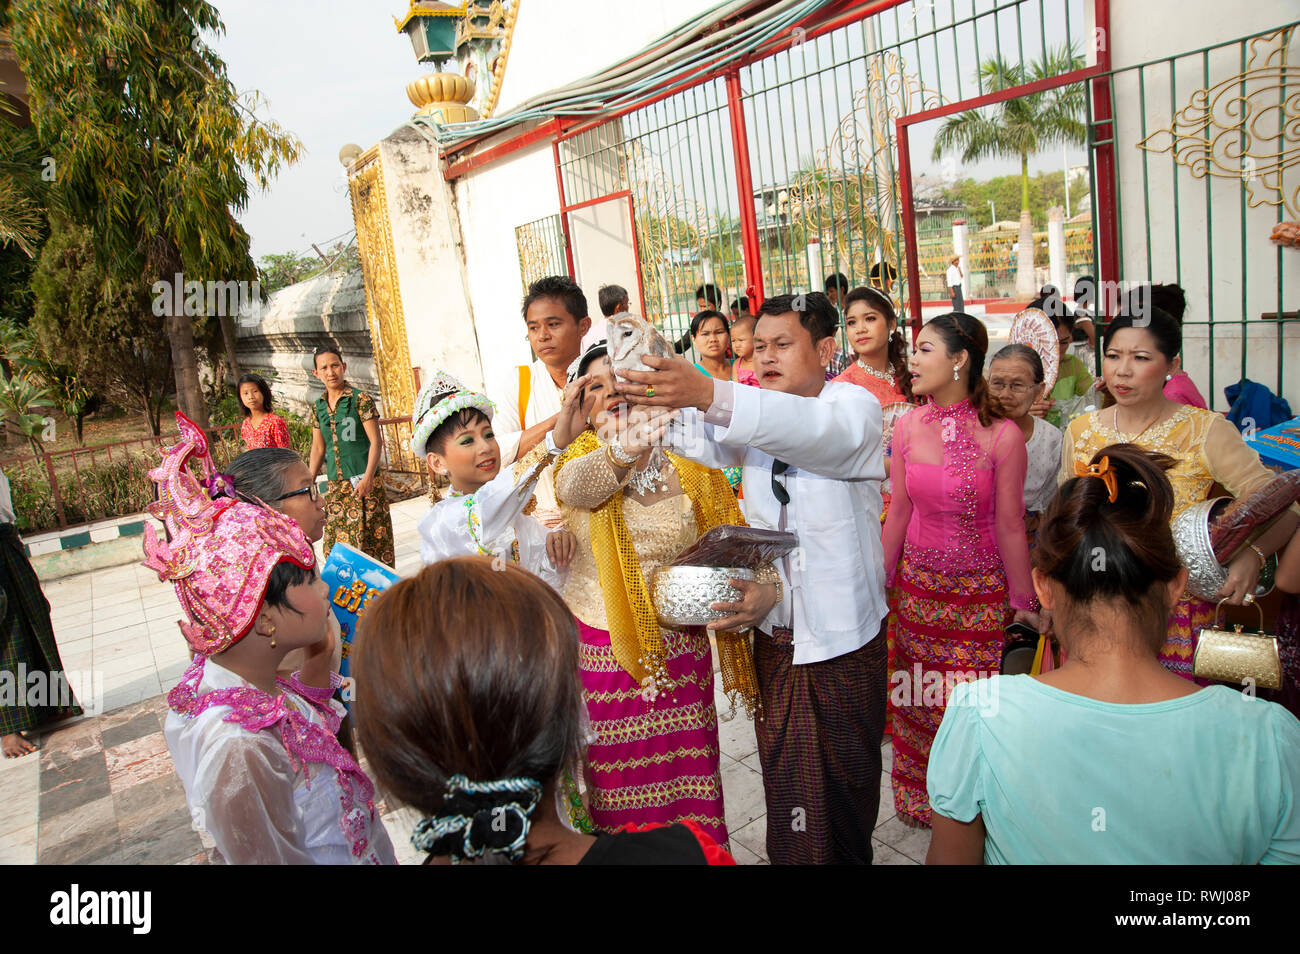 Burmese family releasing an owl into the air as a symbol of good luck at their boy's coming of age ceremony in Mandalay Myanmar Stock Photo